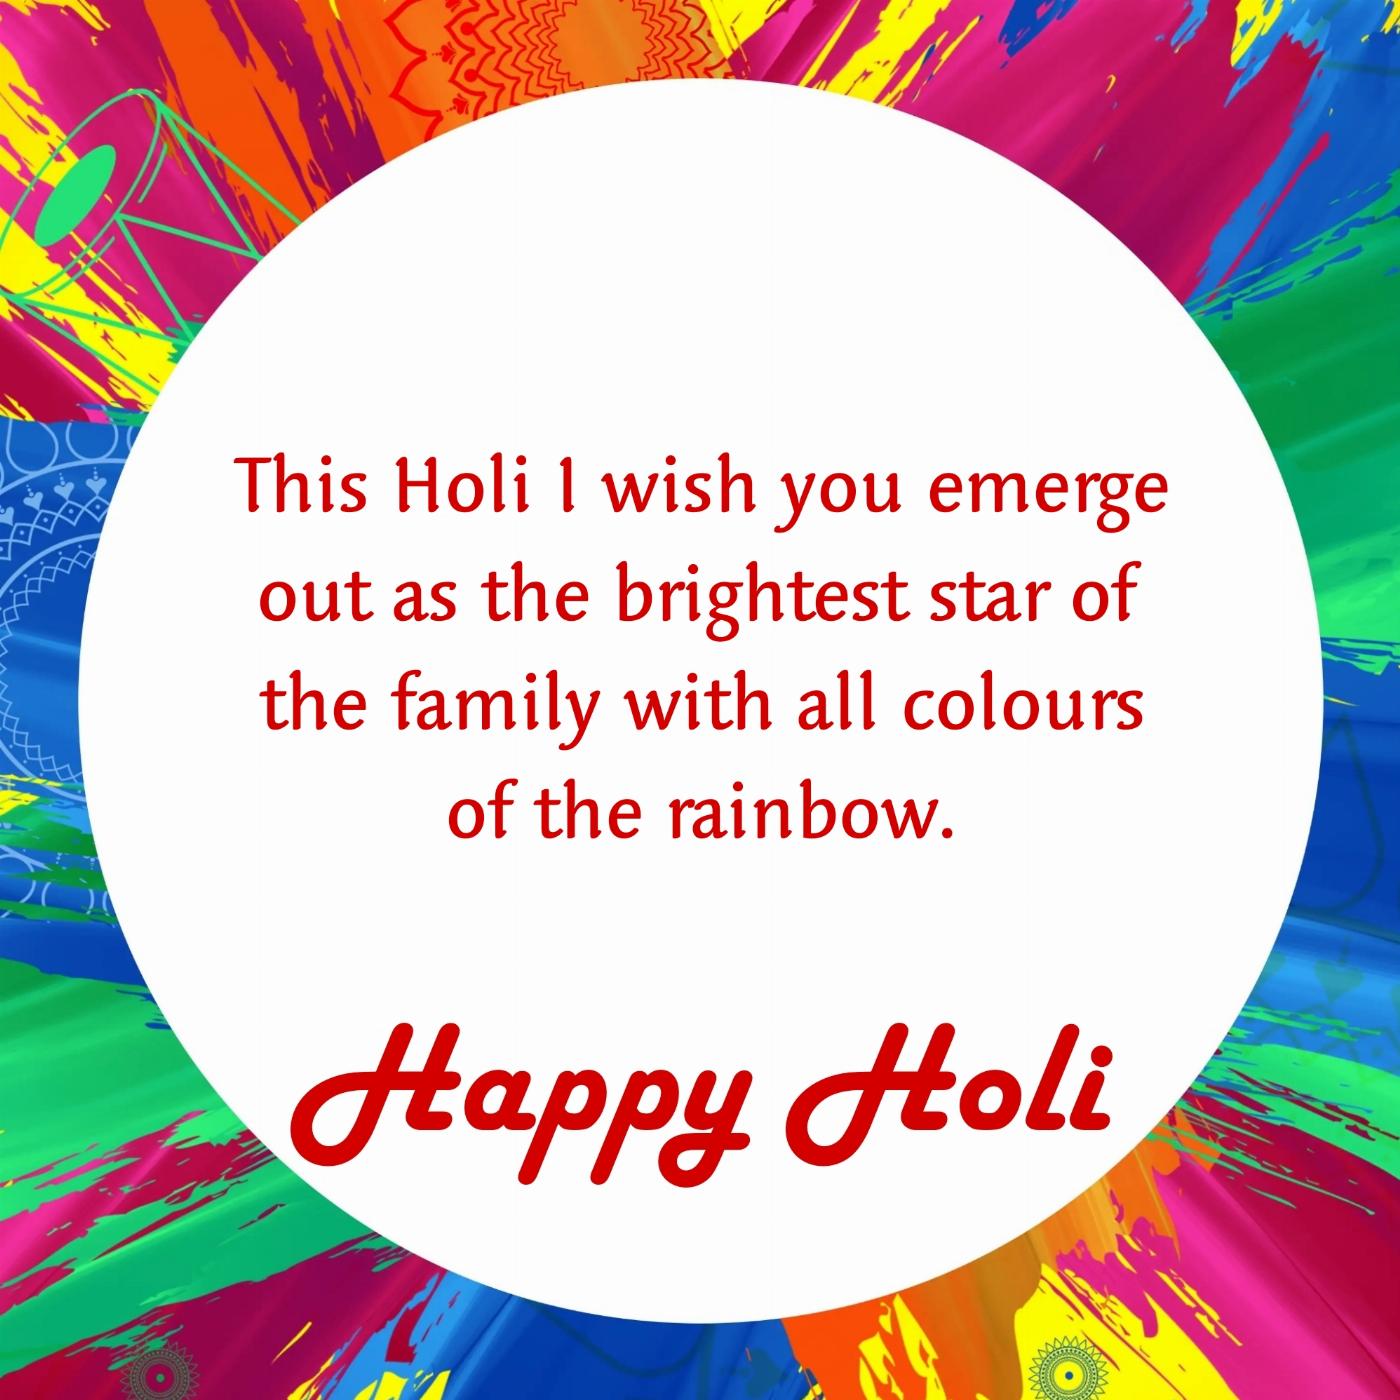 This Holi I wish you emerge out as the brightest star of the family